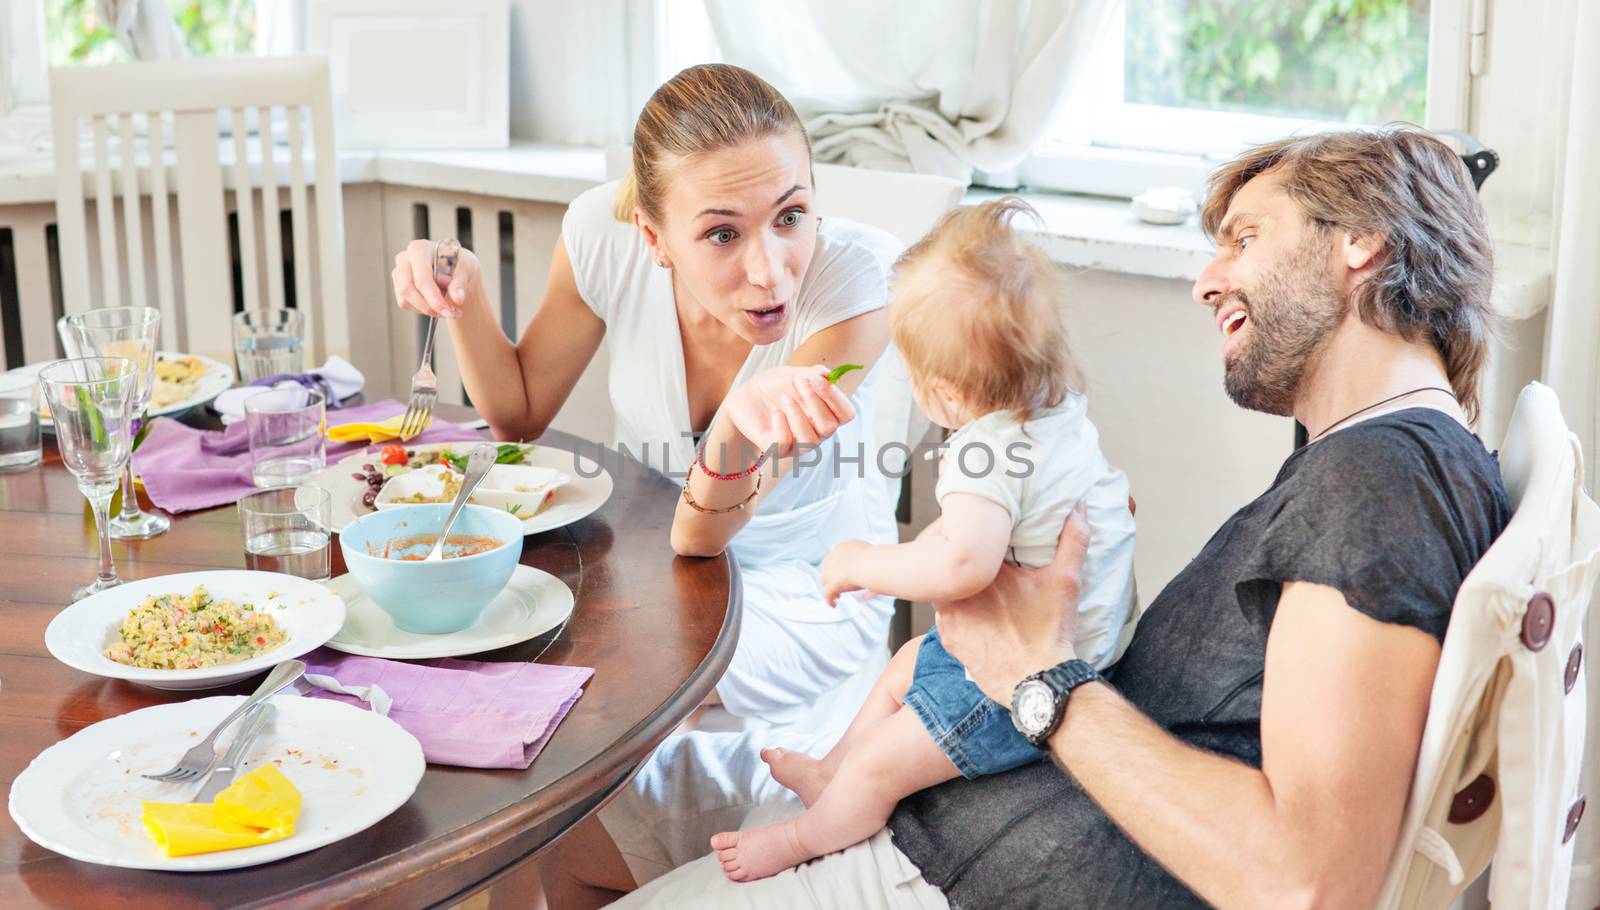 A happy family of young parents with a baby in restaurant.